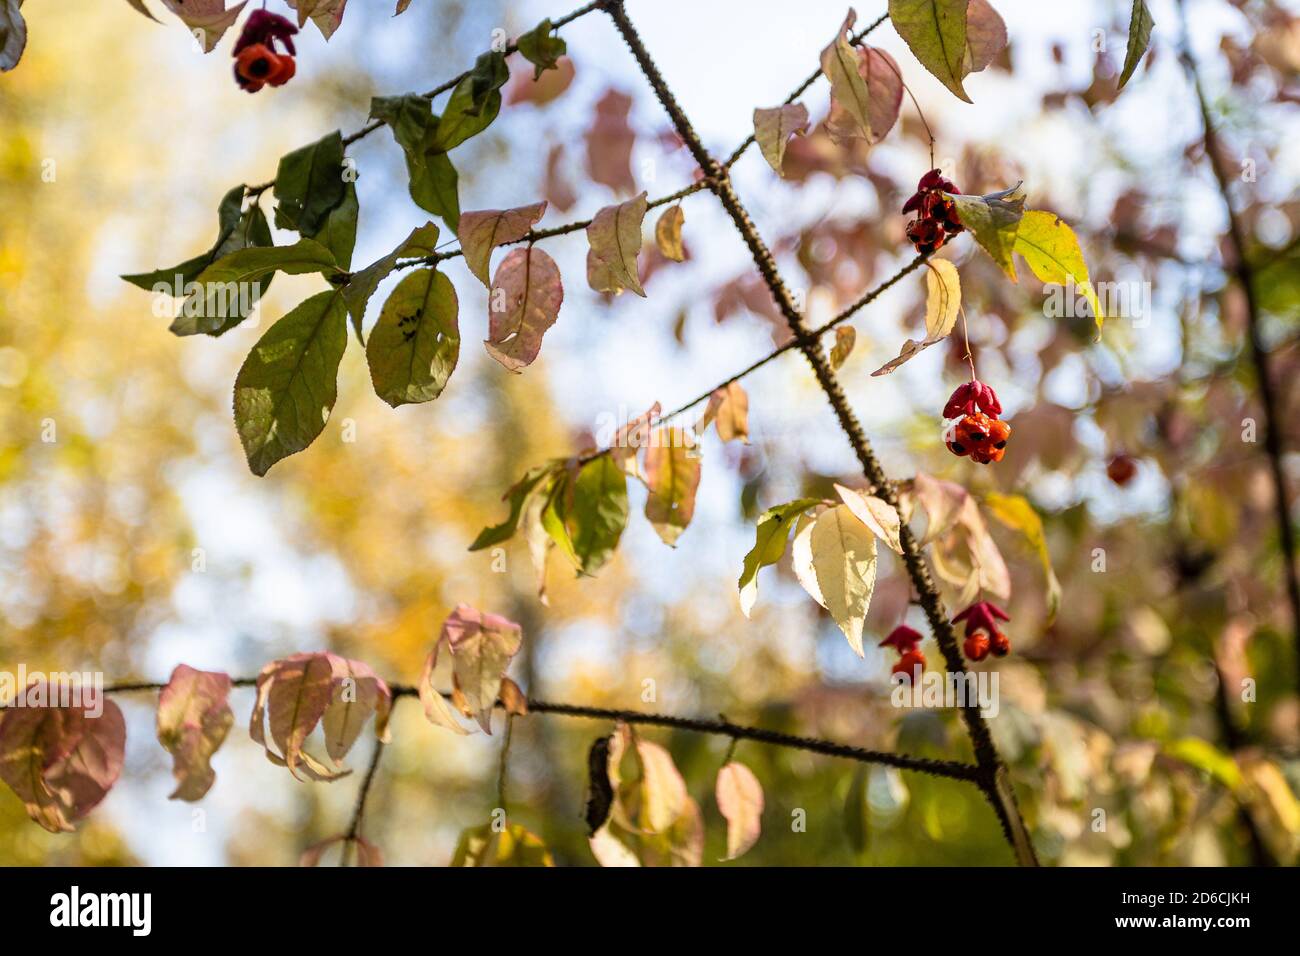 branch of Euonymus tree with ripe berries close up in city park on sunny autumn day (focus on berries on foreground) Stock Photo